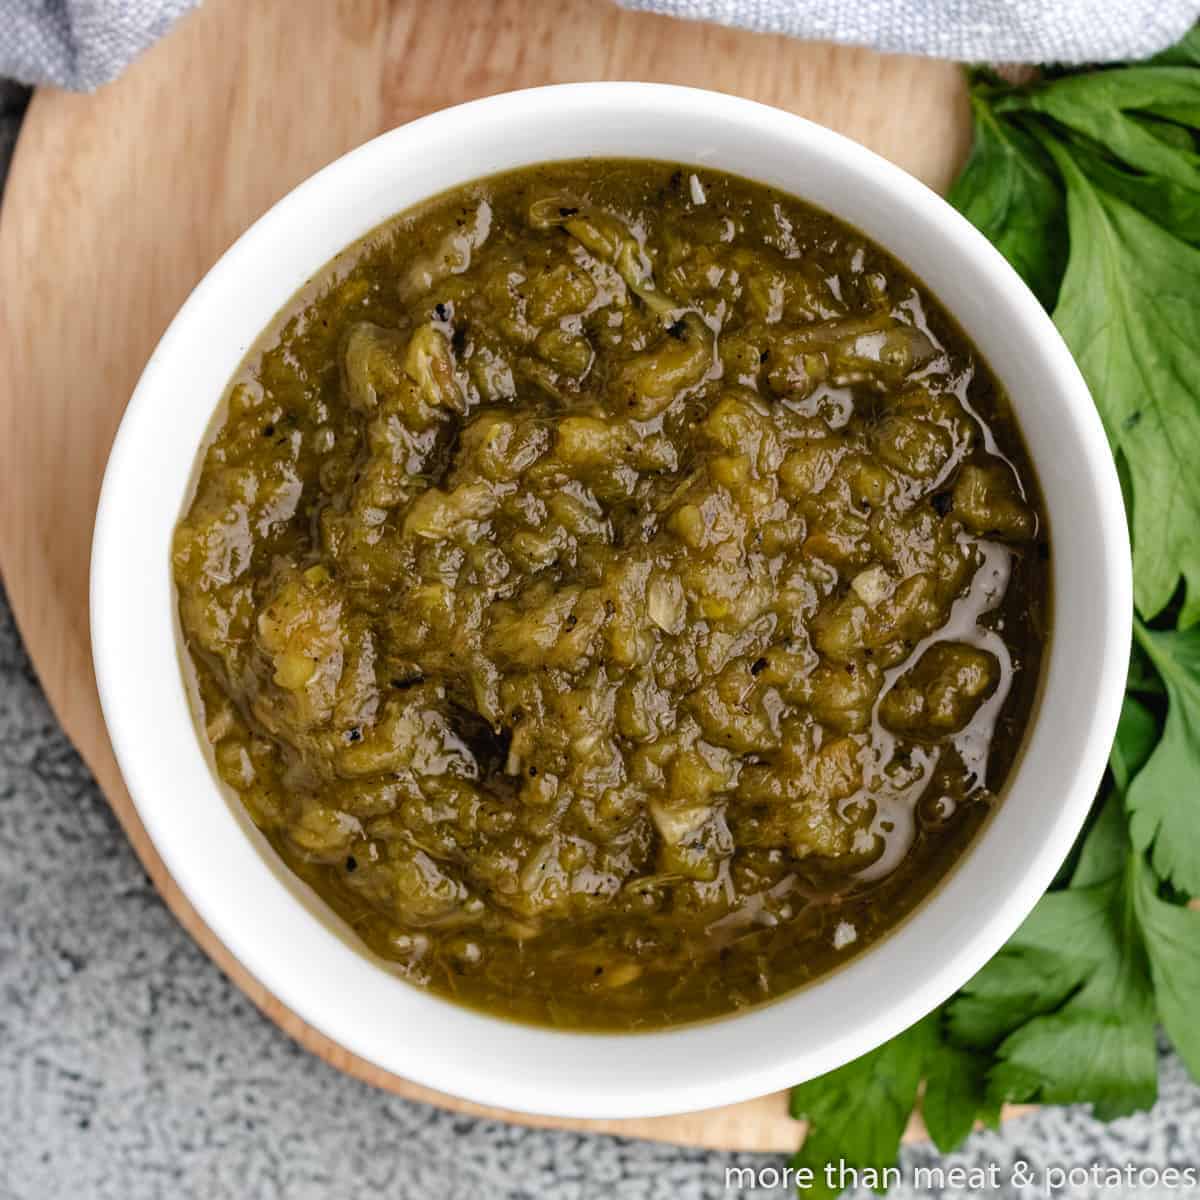 Hatch green chile sauce